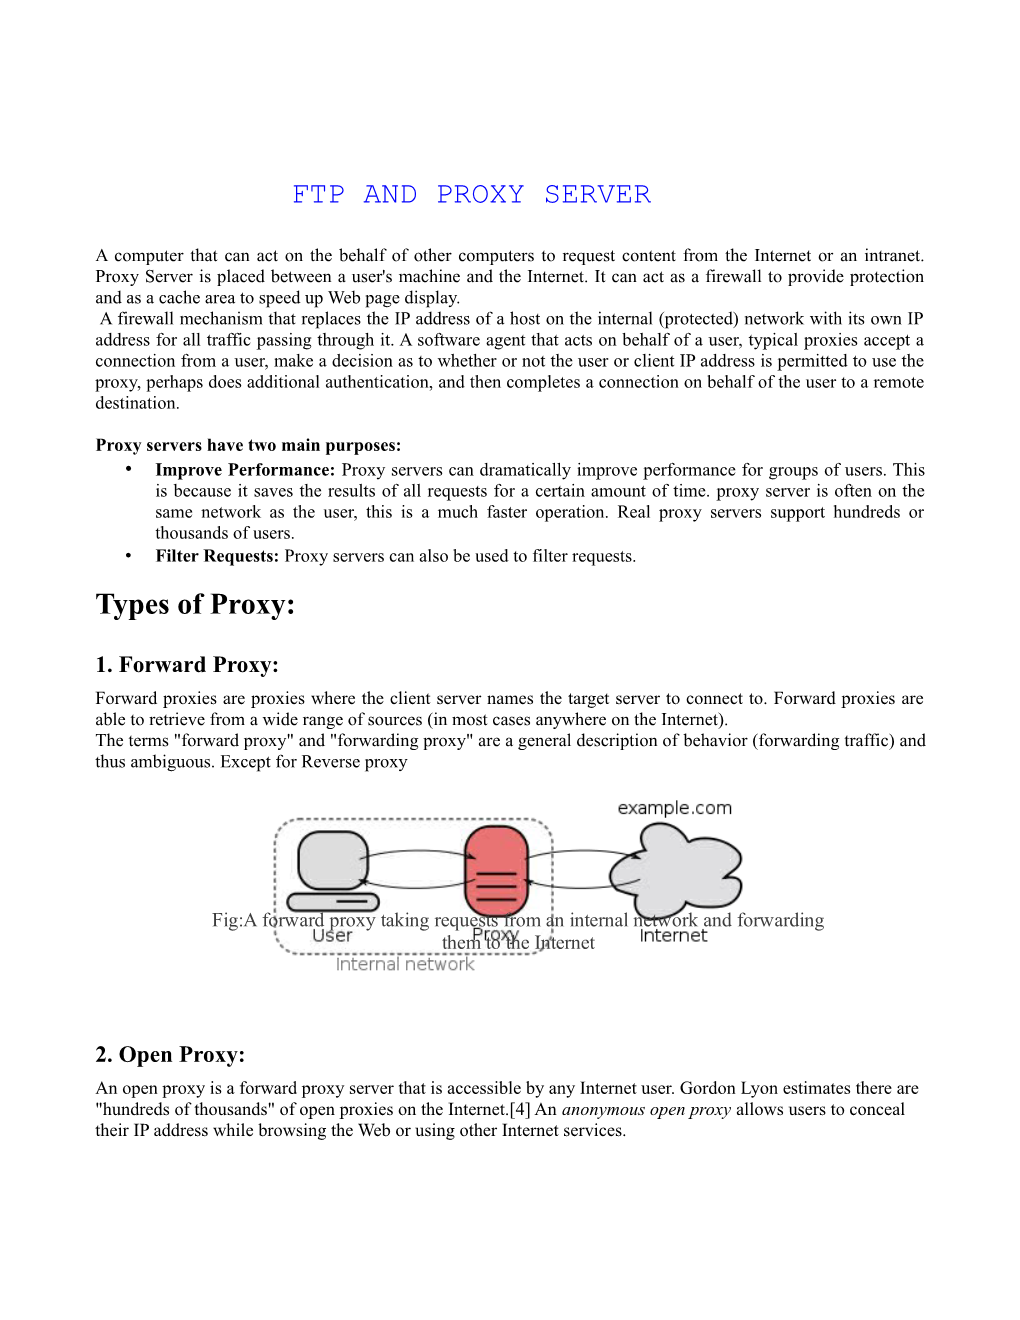 Types of Proxy: FTP and PROXY SERVER